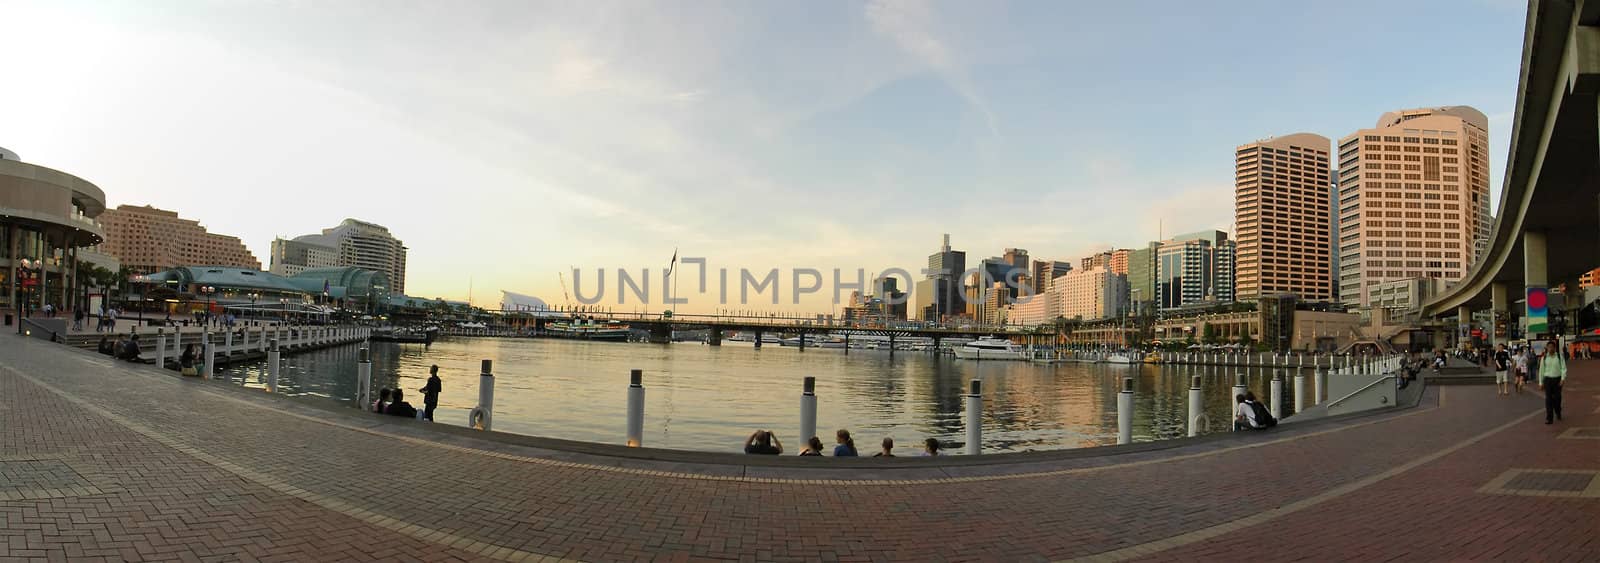 darling harbour by rorem